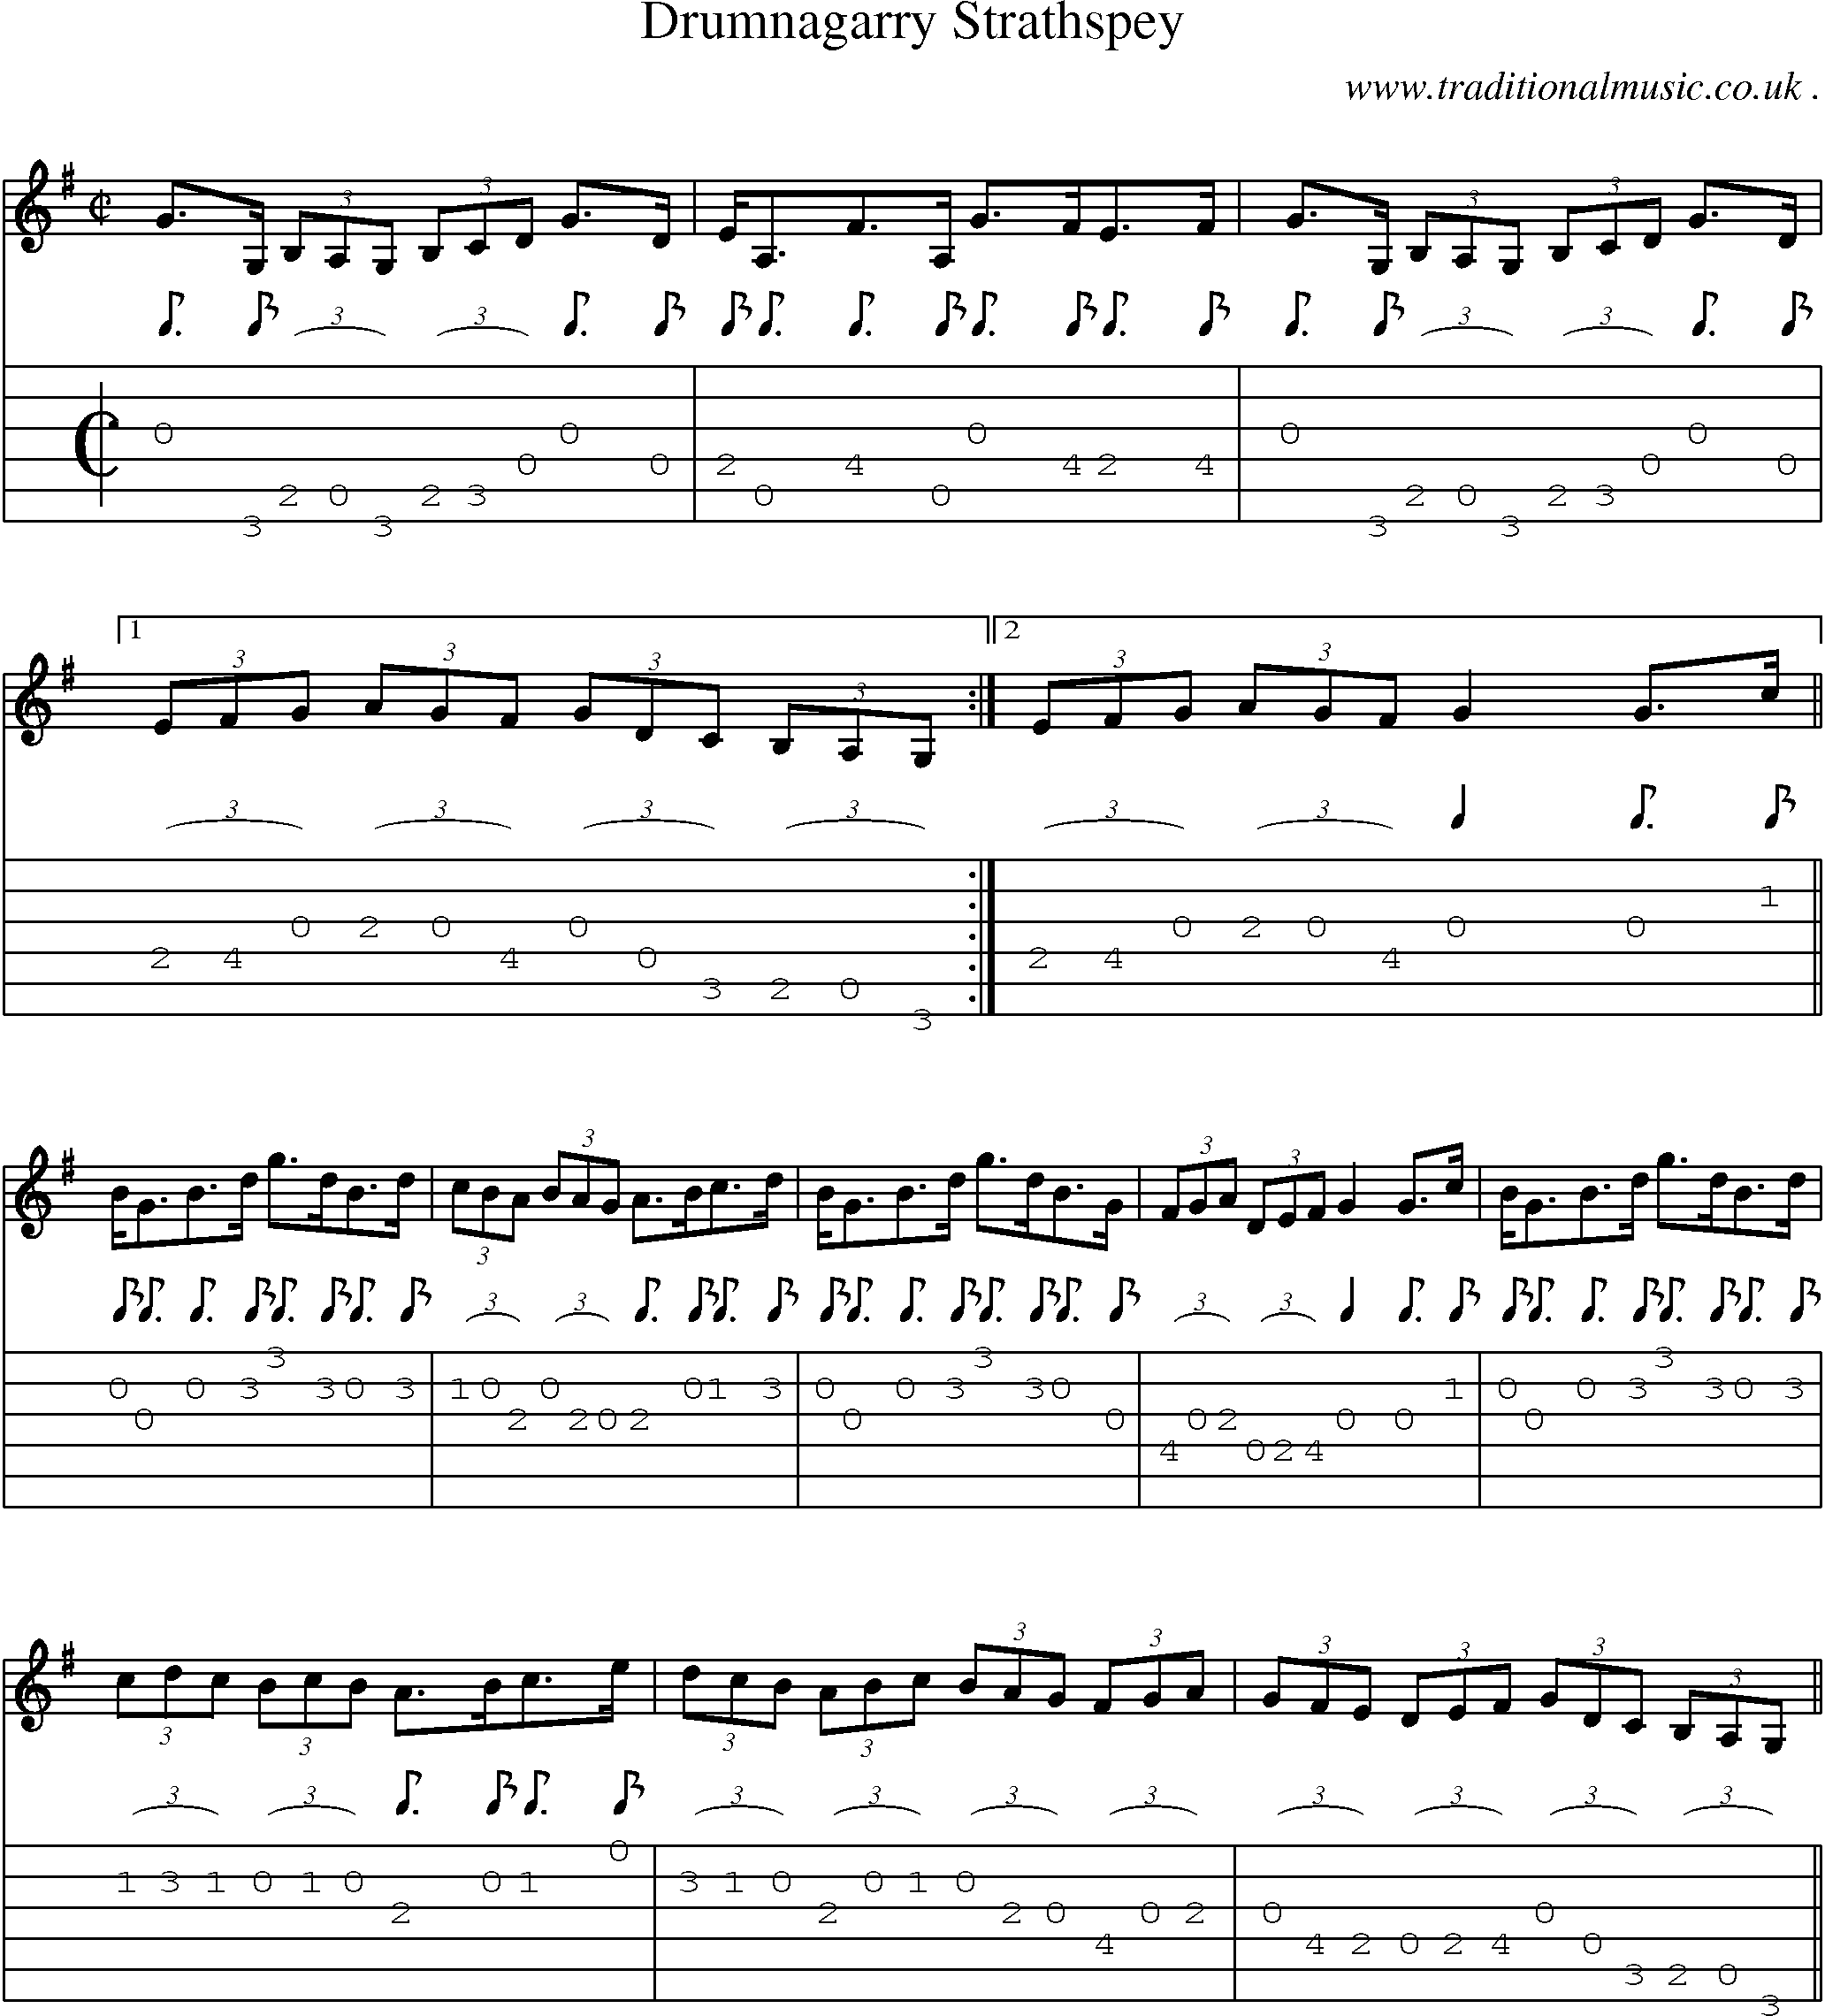 Sheet-Music and Guitar Tabs for Drumnagarry Strathspey